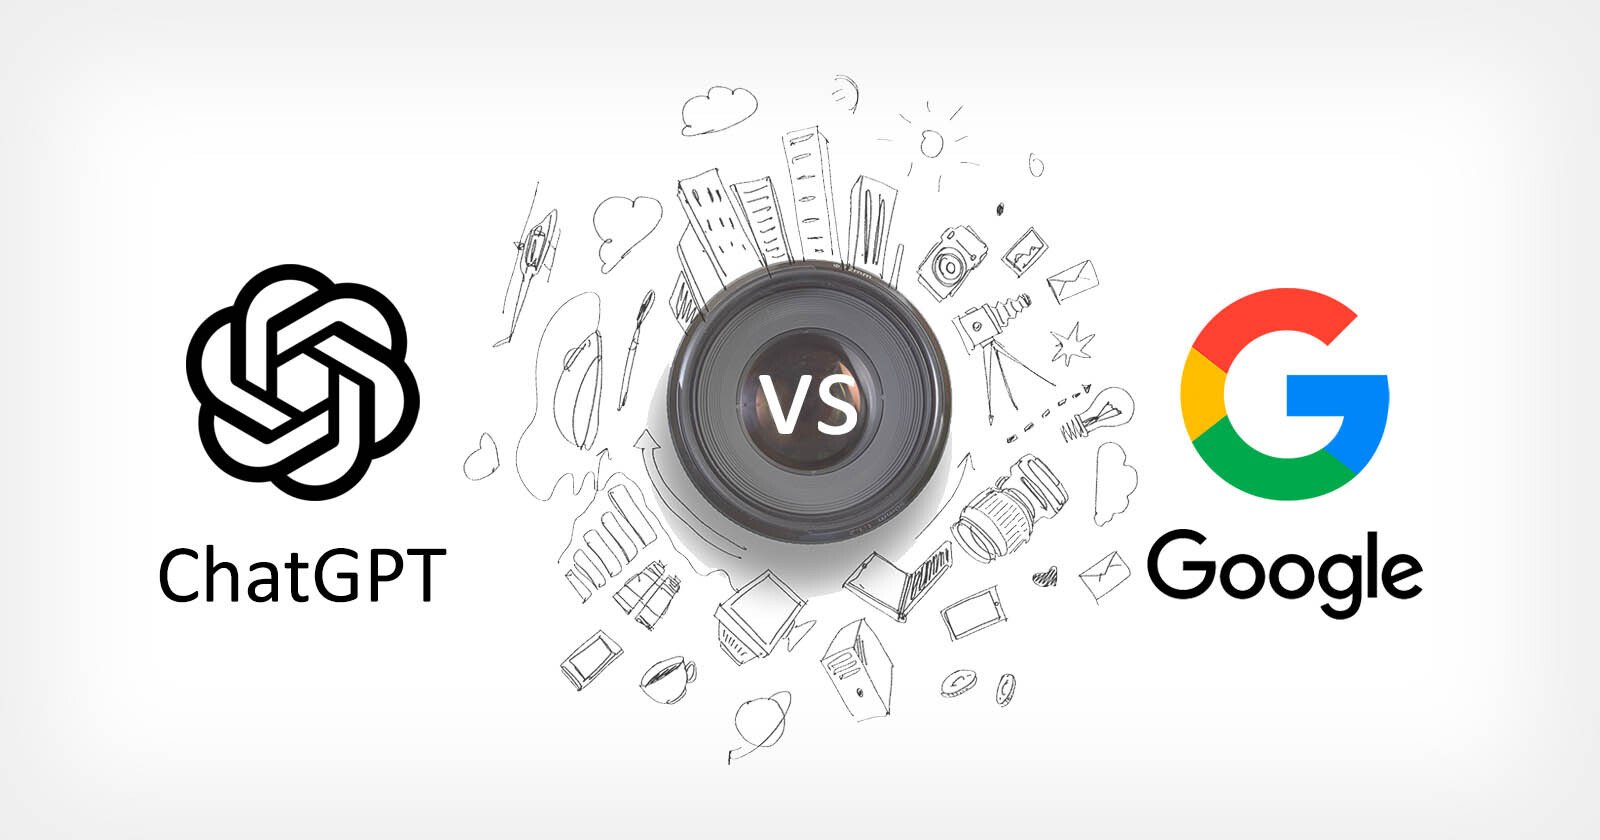 ChatGPT vs Google: Which is Better at Answering Photography Questions?